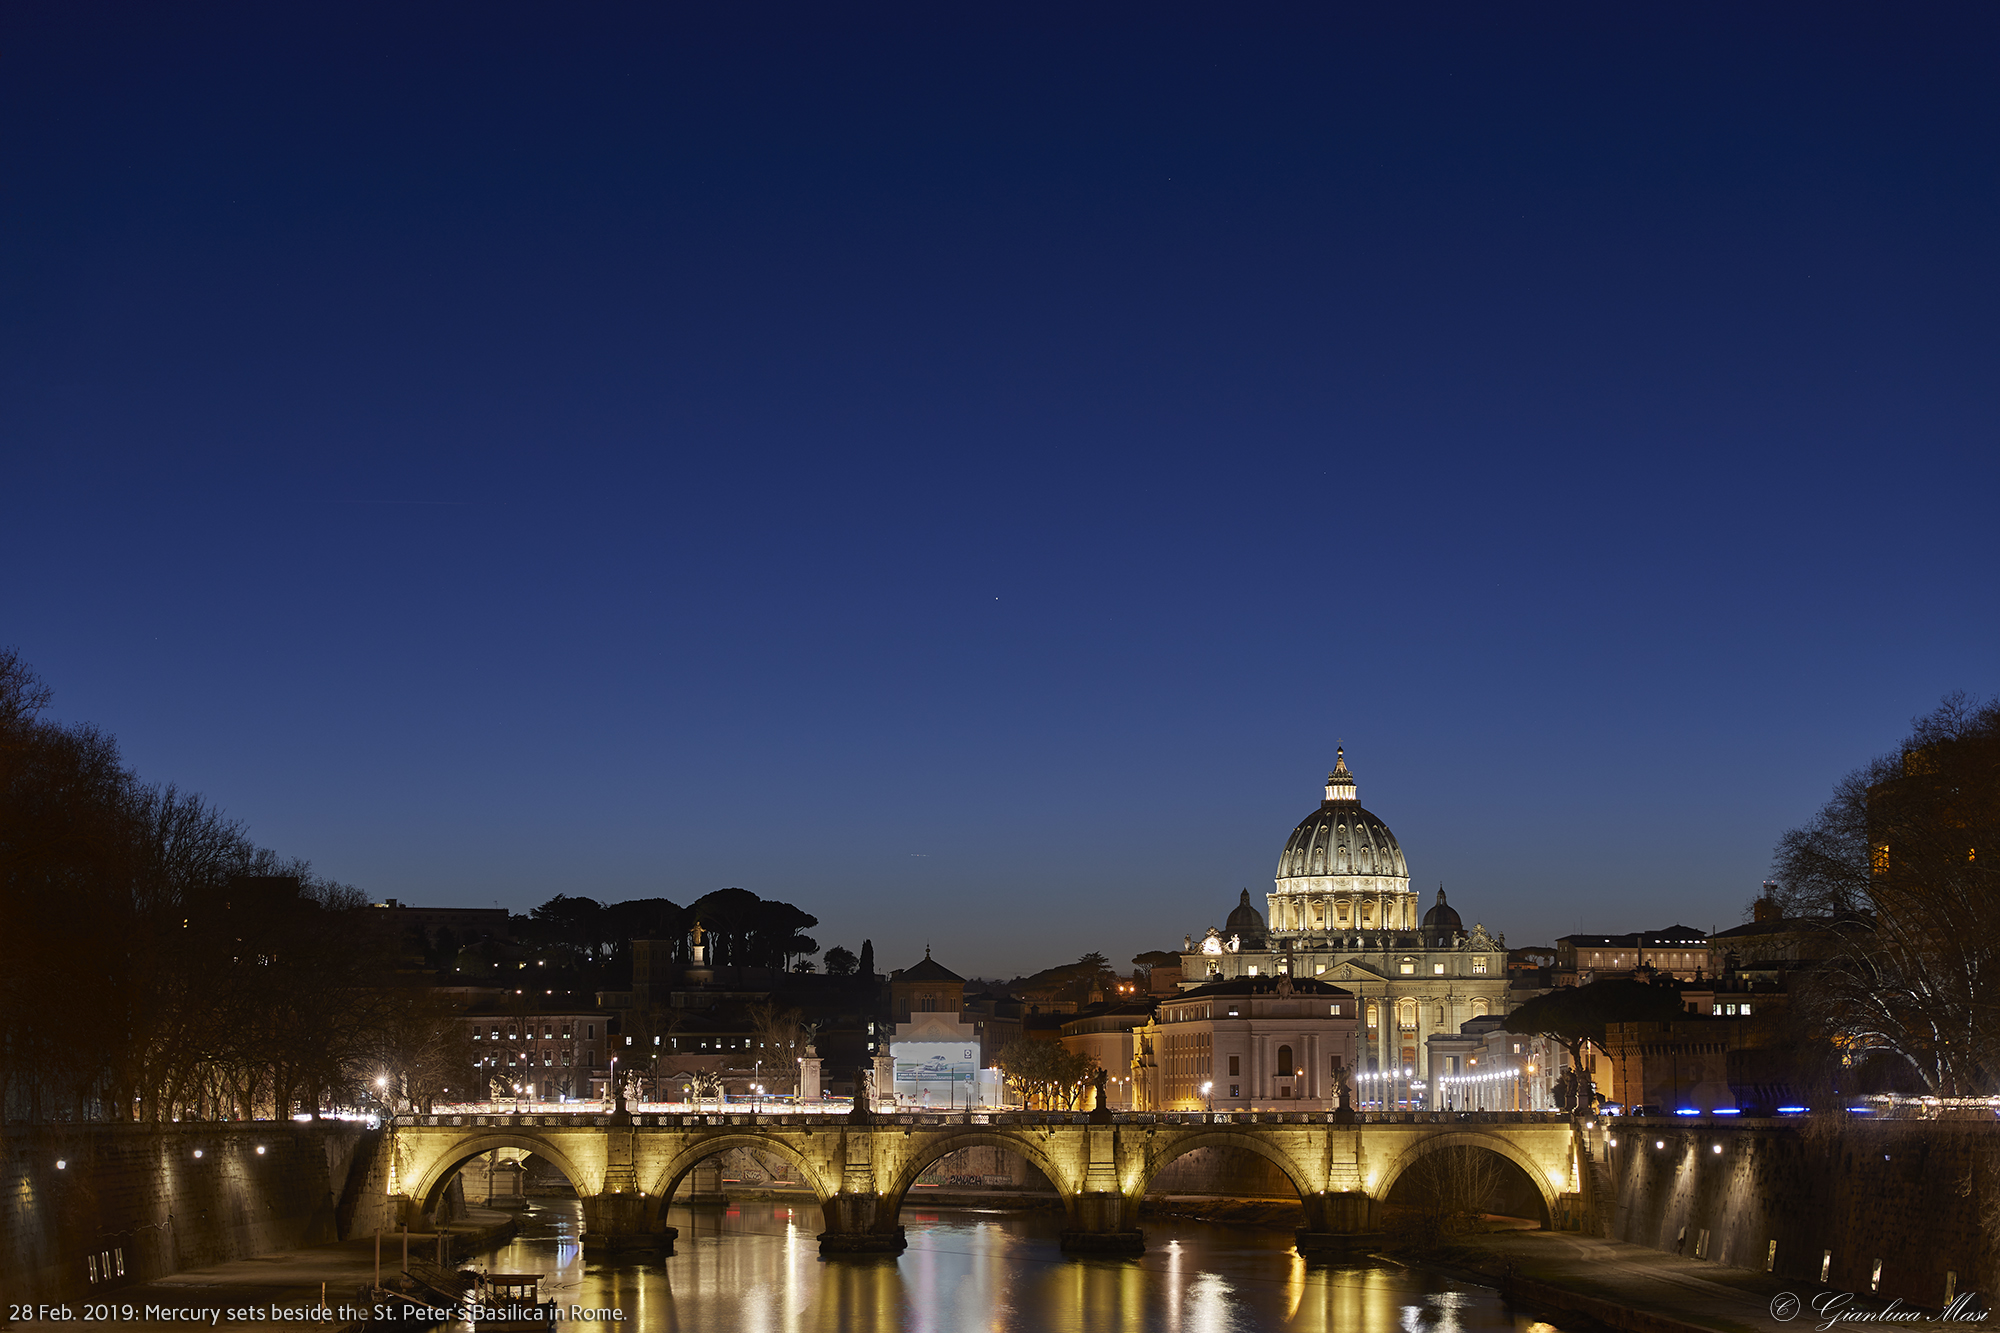 Planet Mercury slowly sets in Rome beside St. Peter's Basilica - 28 Feb. 2019